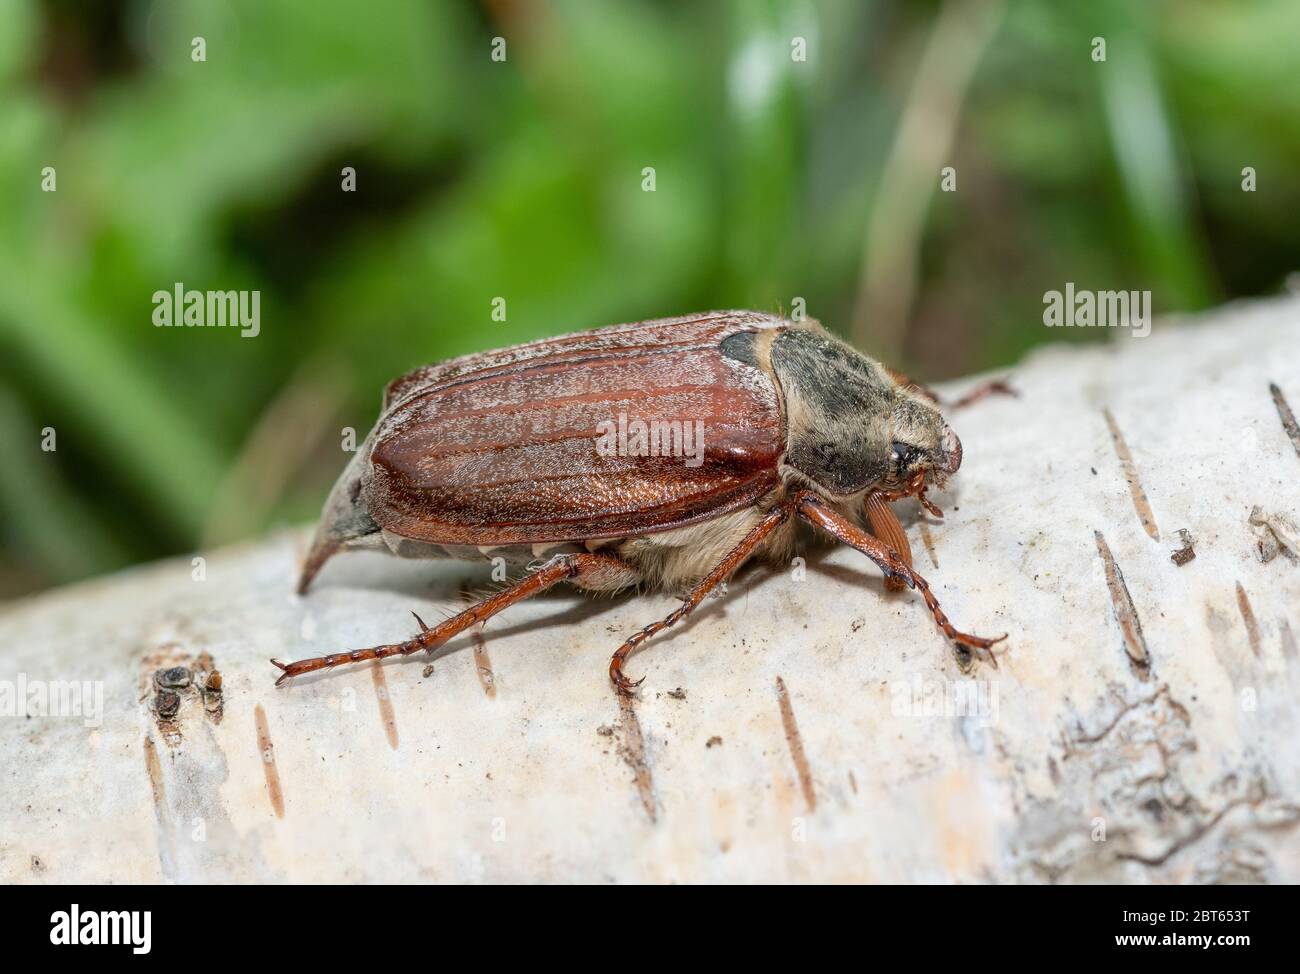 Cockchafer beetle, also called maybug or may bug (Melolontha melolontha), UK Stock Photo